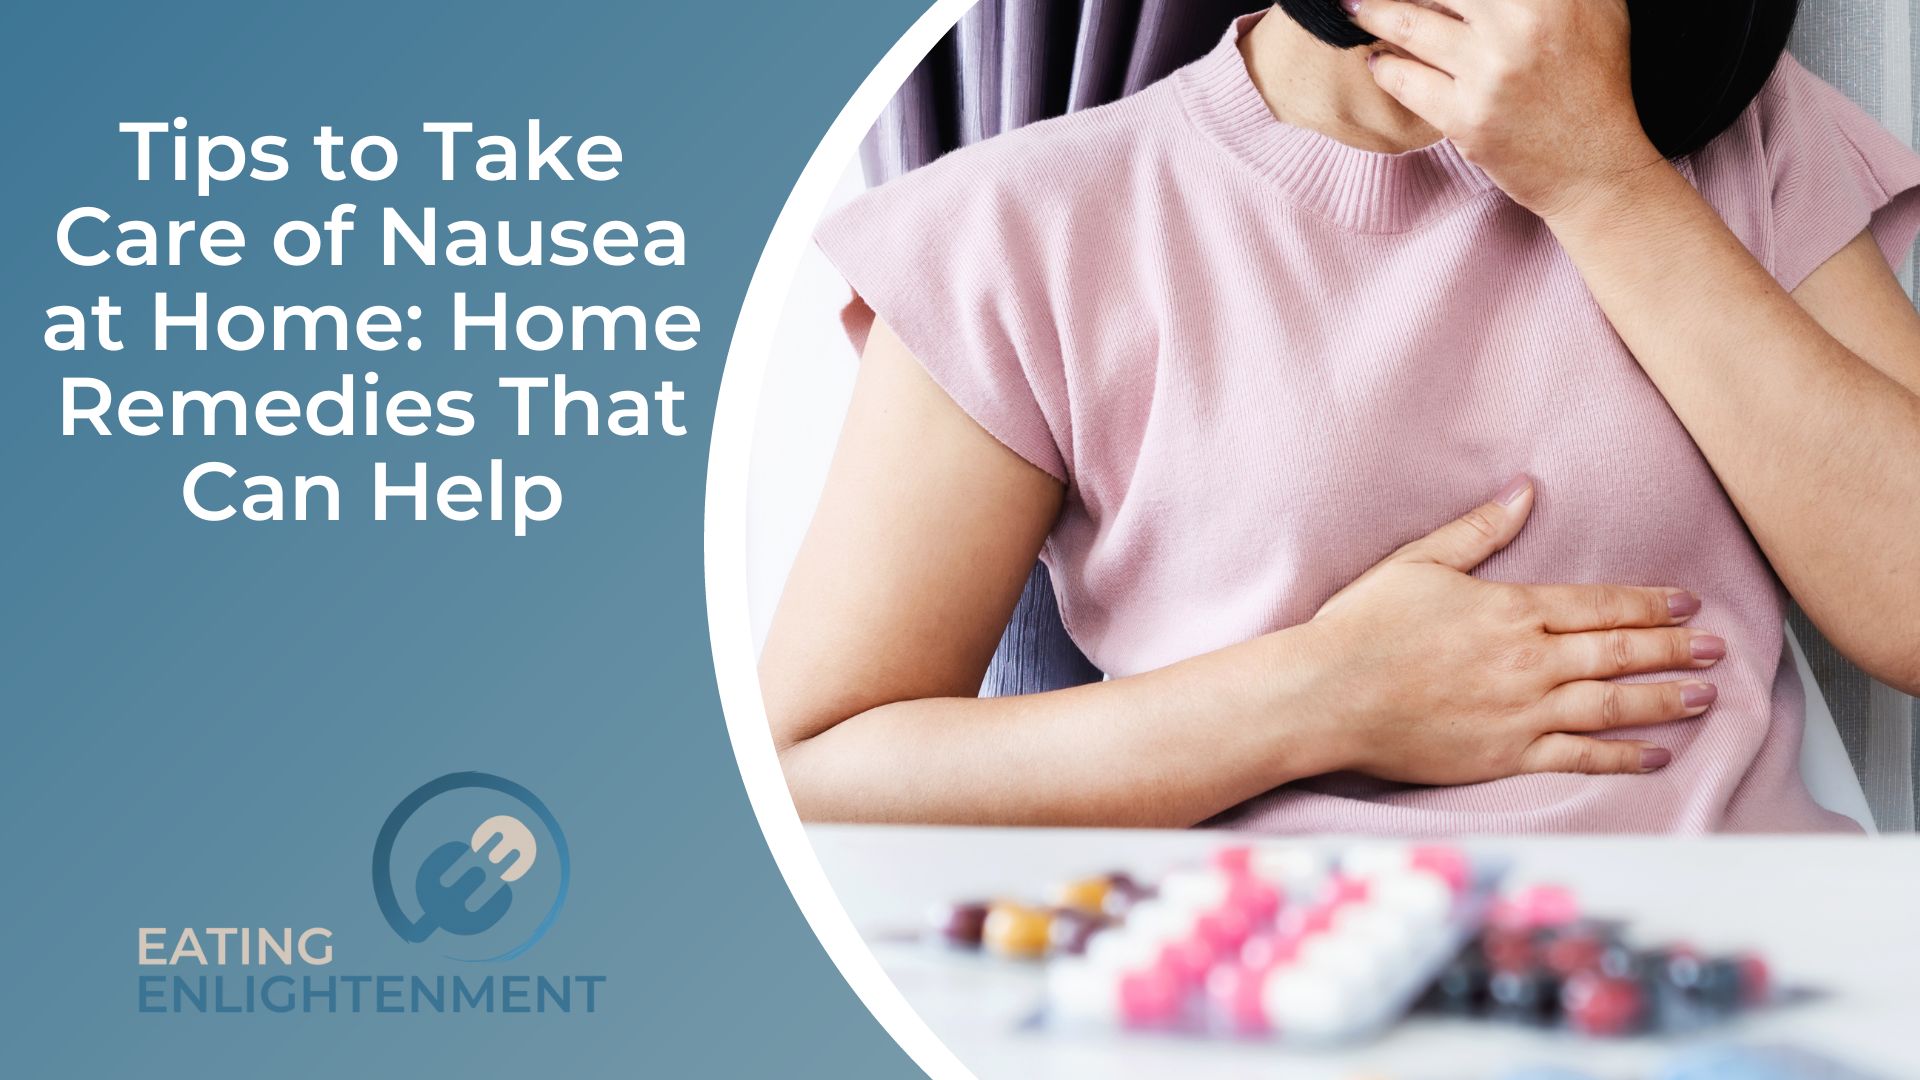 Tips to Take Care of Nausea at Home Home Remedies That Can Help